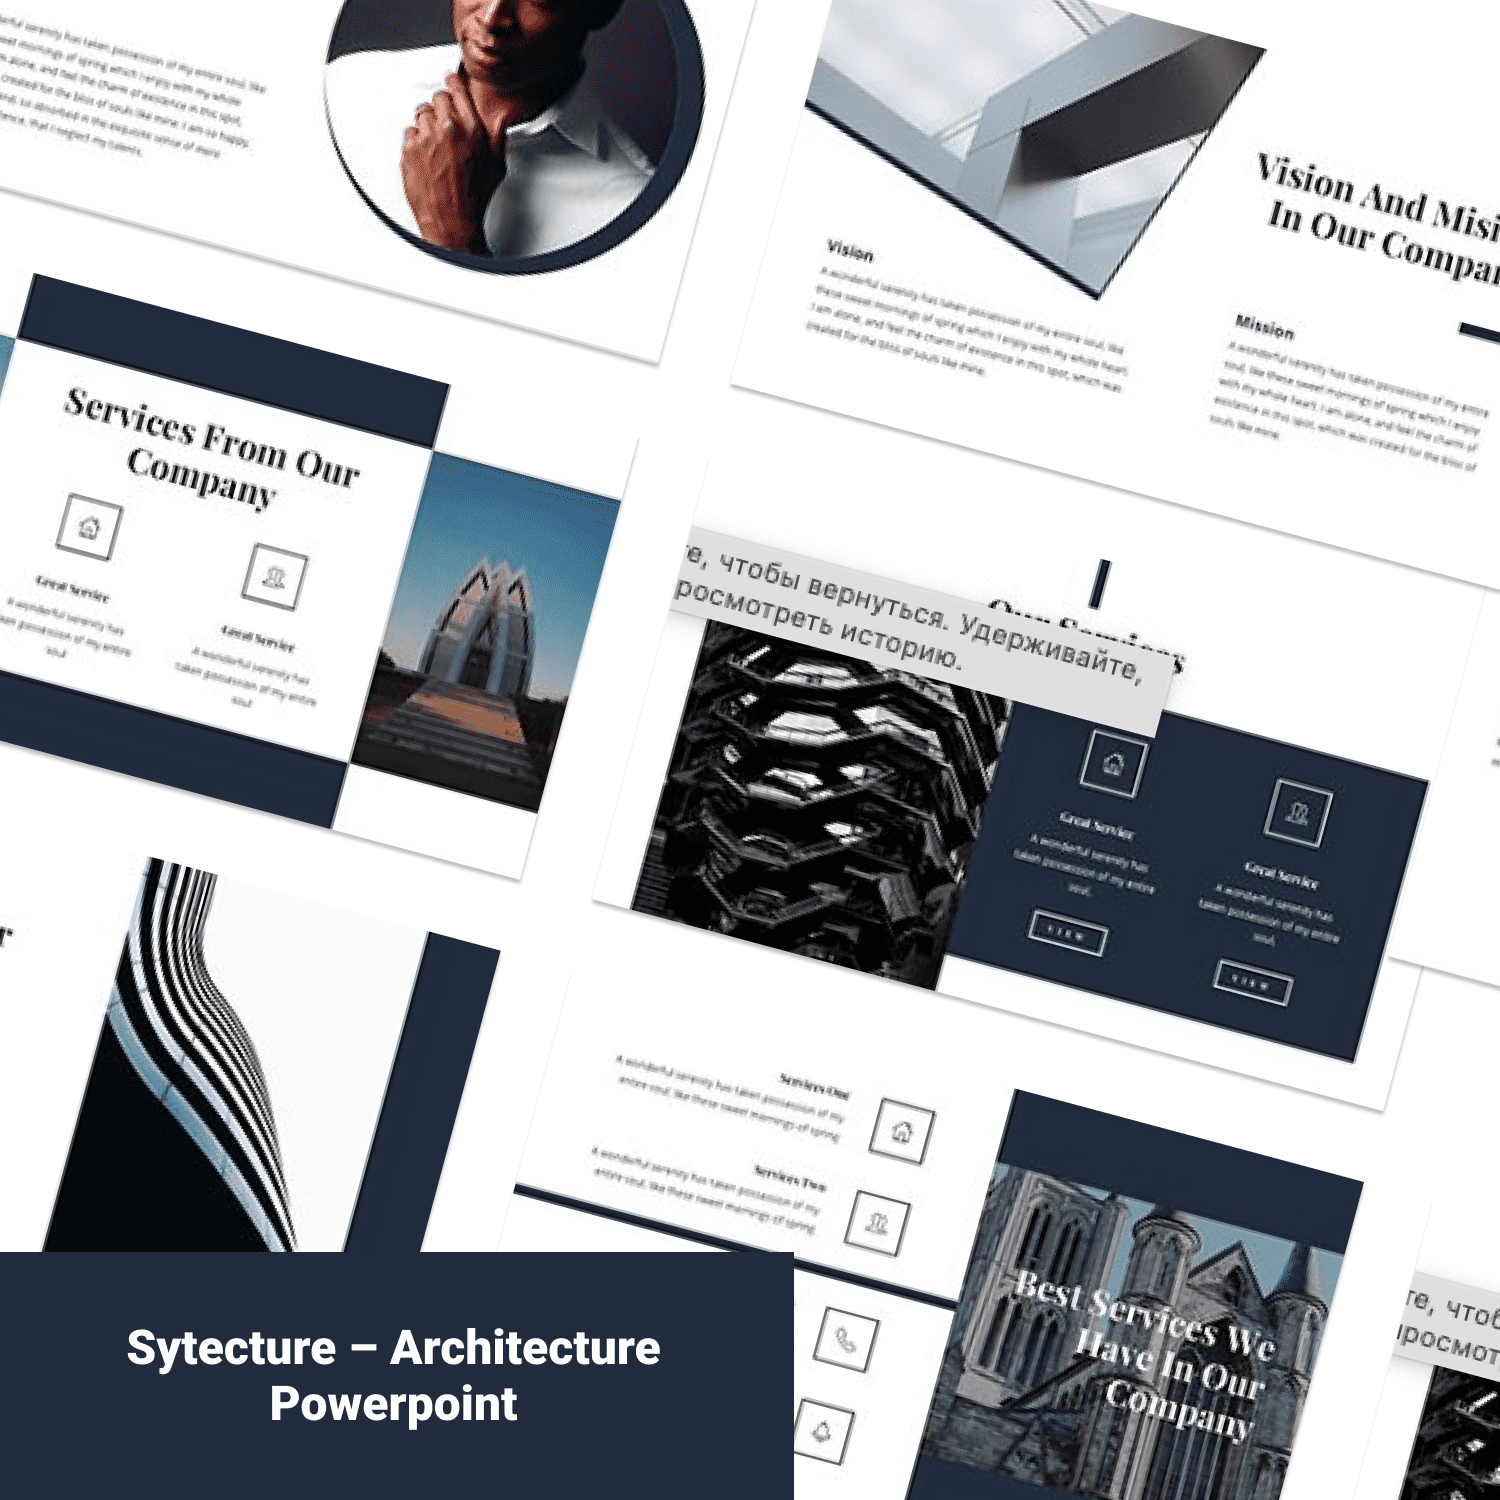 Sytecture – Architecture Powerpoint.